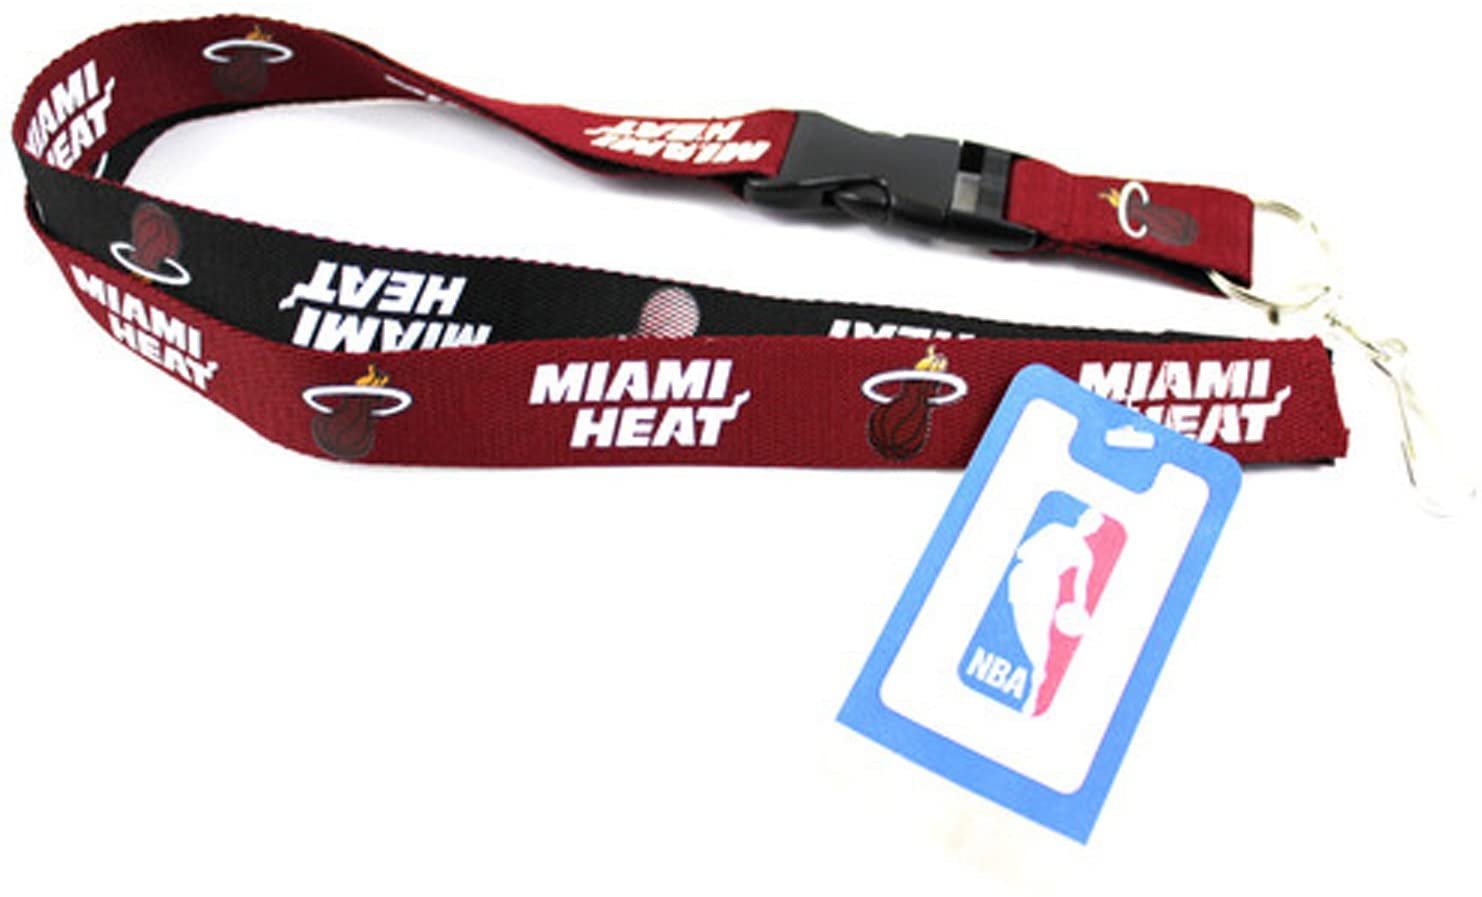 Miami Heat Two Tone Lanyard Keychain Double Sided Breakaway Safety Design Adult 18 Inch